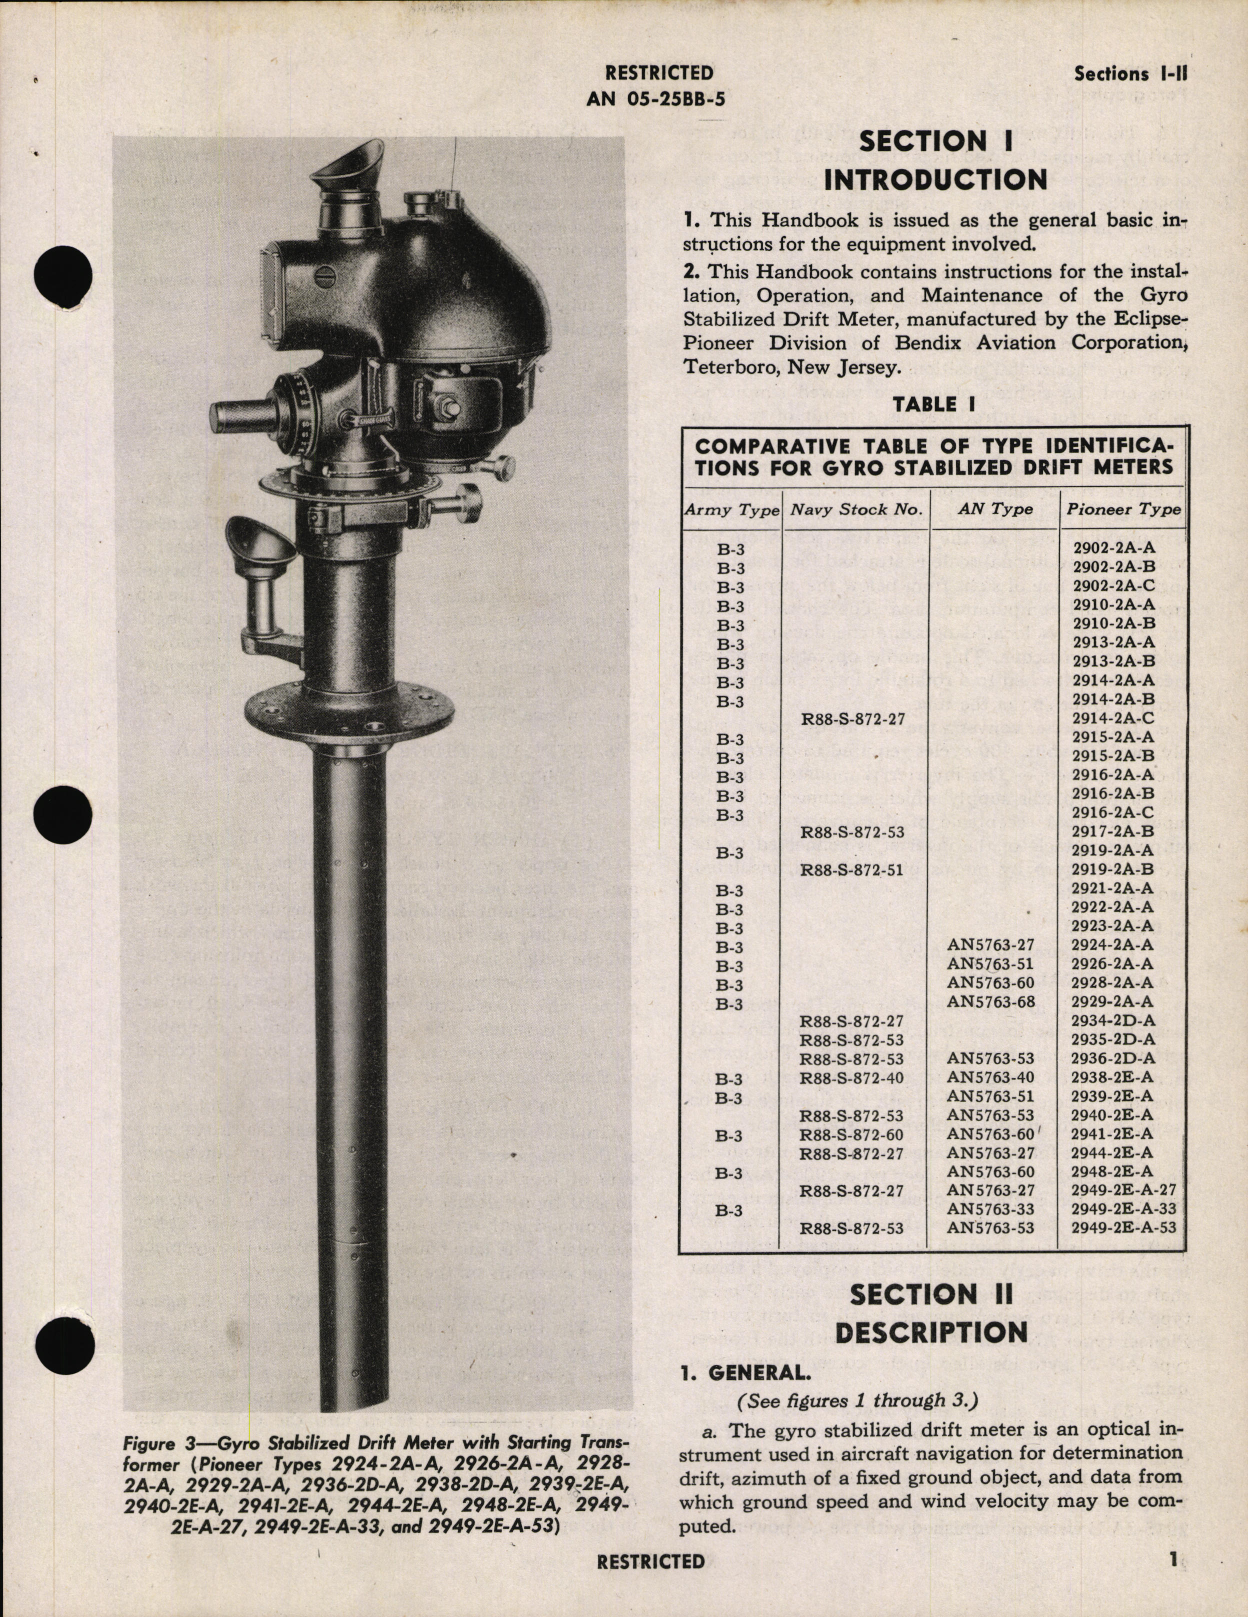 Sample page 5 from AirCorps Library document: Operation and Service Instructions for Drift Meters Type B-3 (Navy R88-S-872-27, -40, -51, -53, -60)